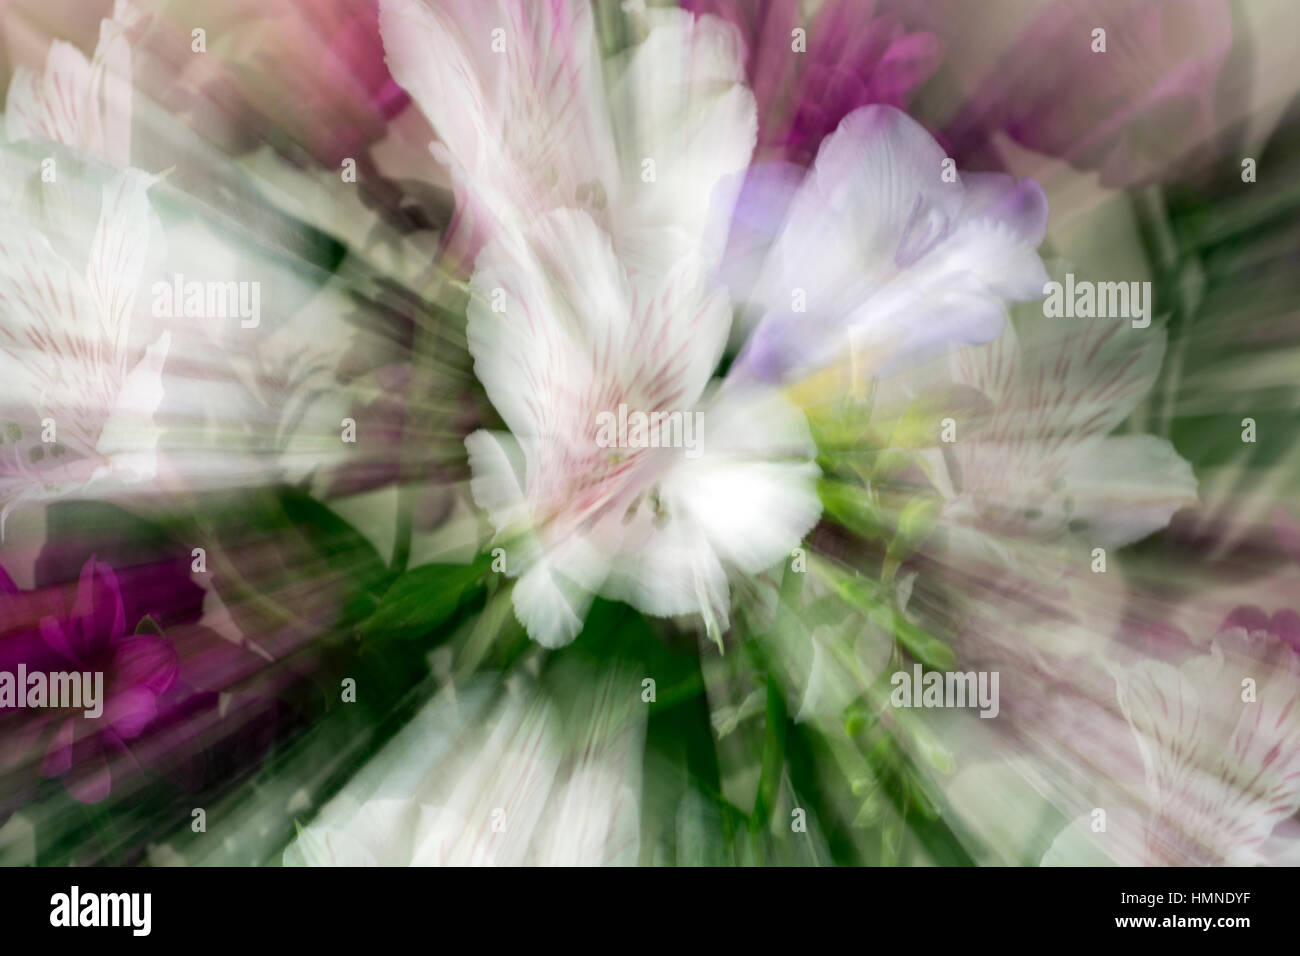 Zoomed image of a flower arrangement Stock Photo